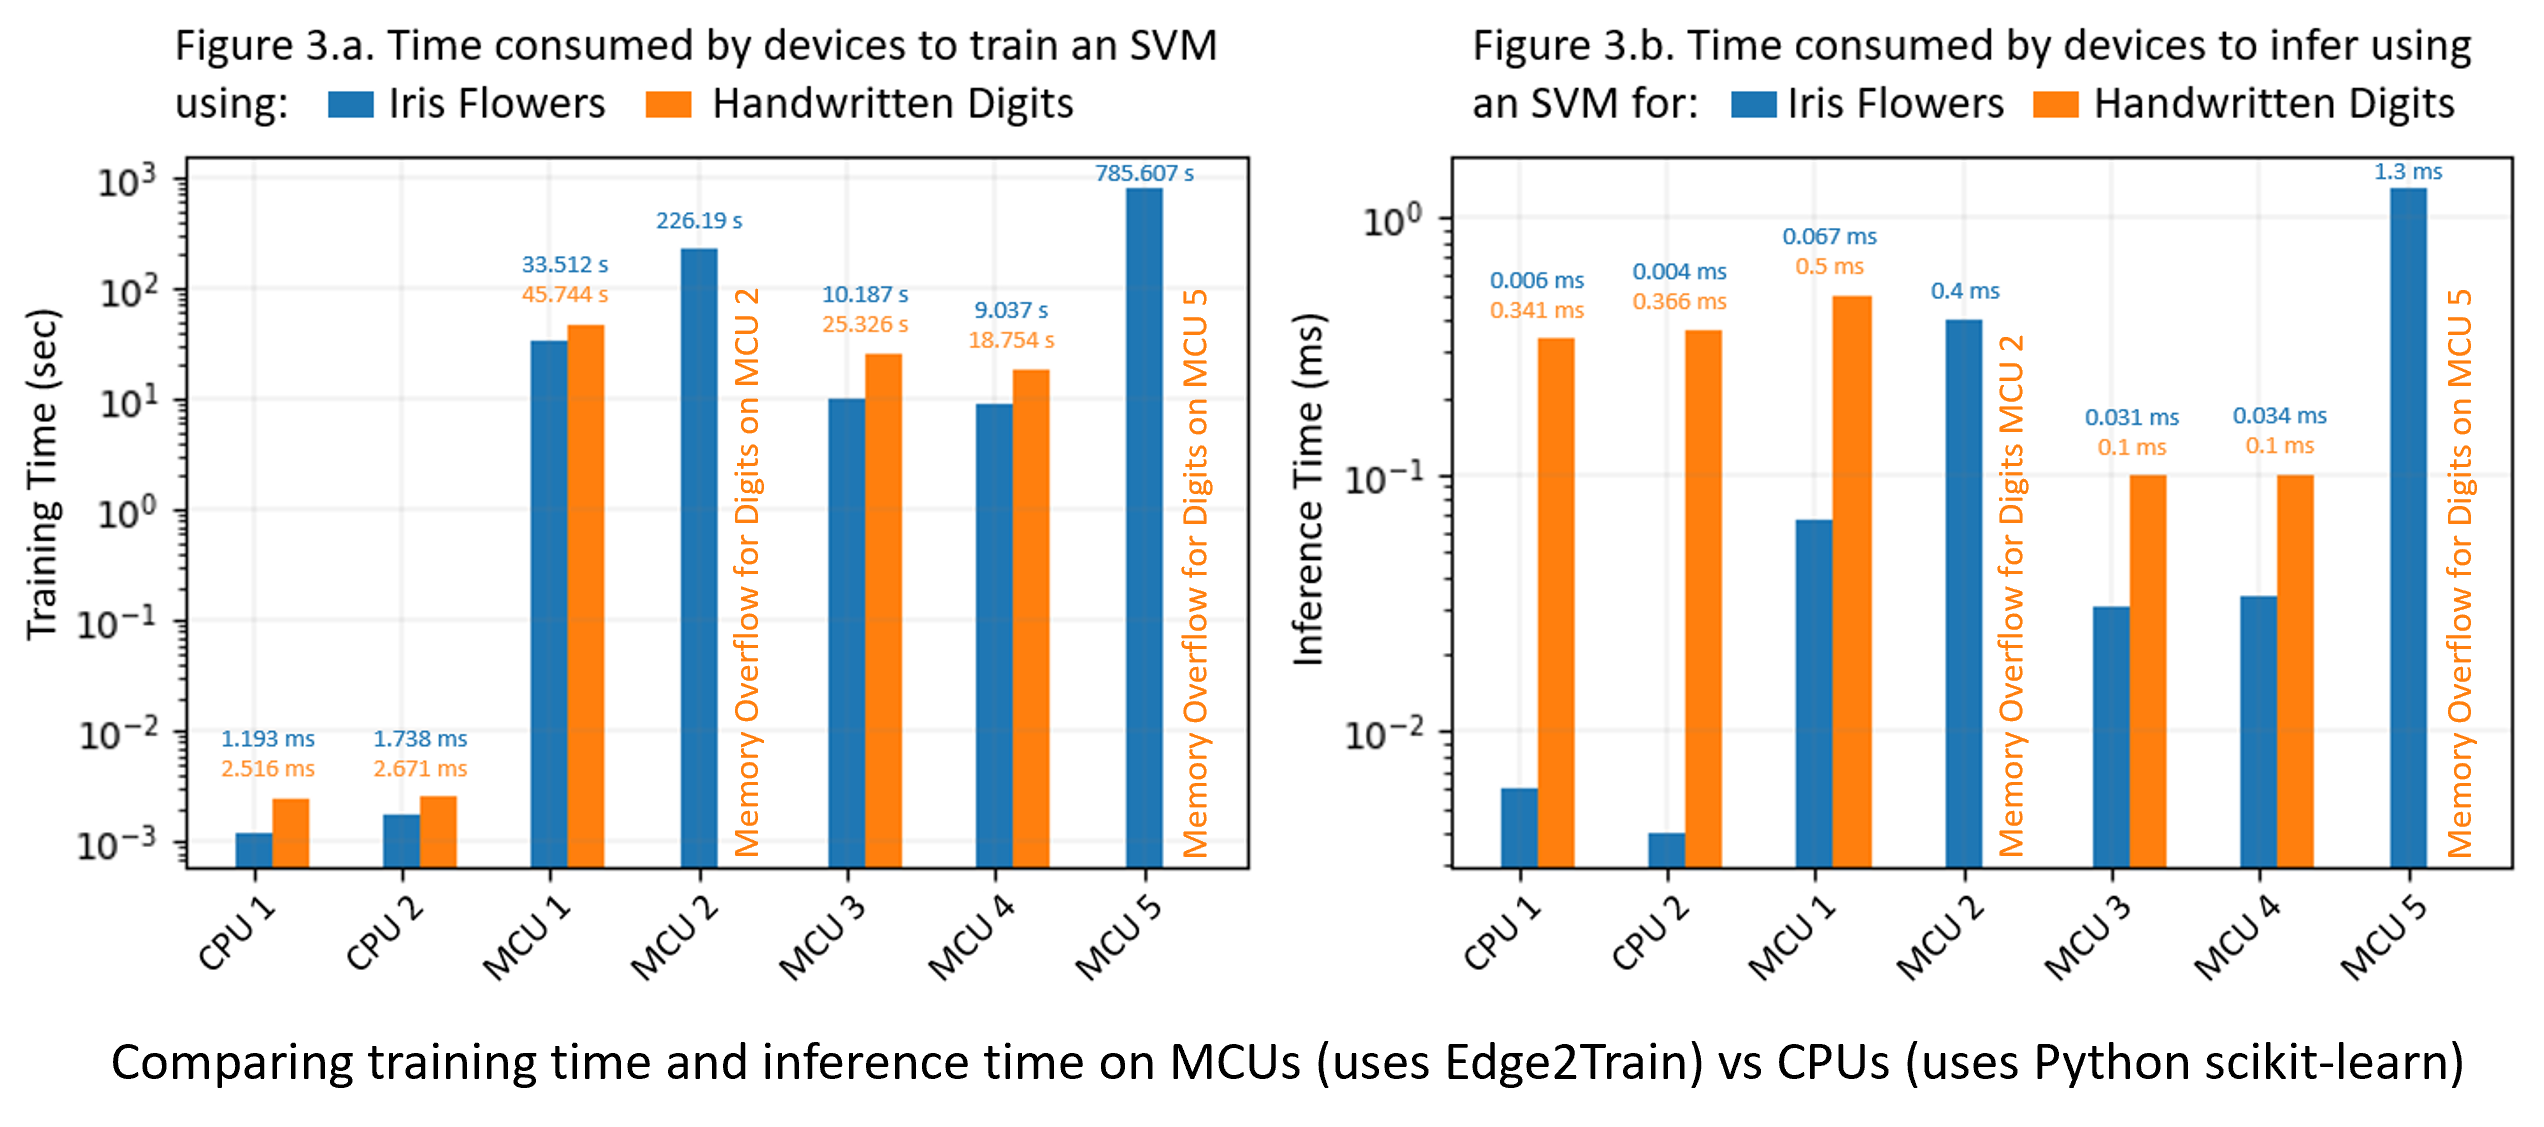 Train_and_infer_time_on_mcus_and_cpus.png